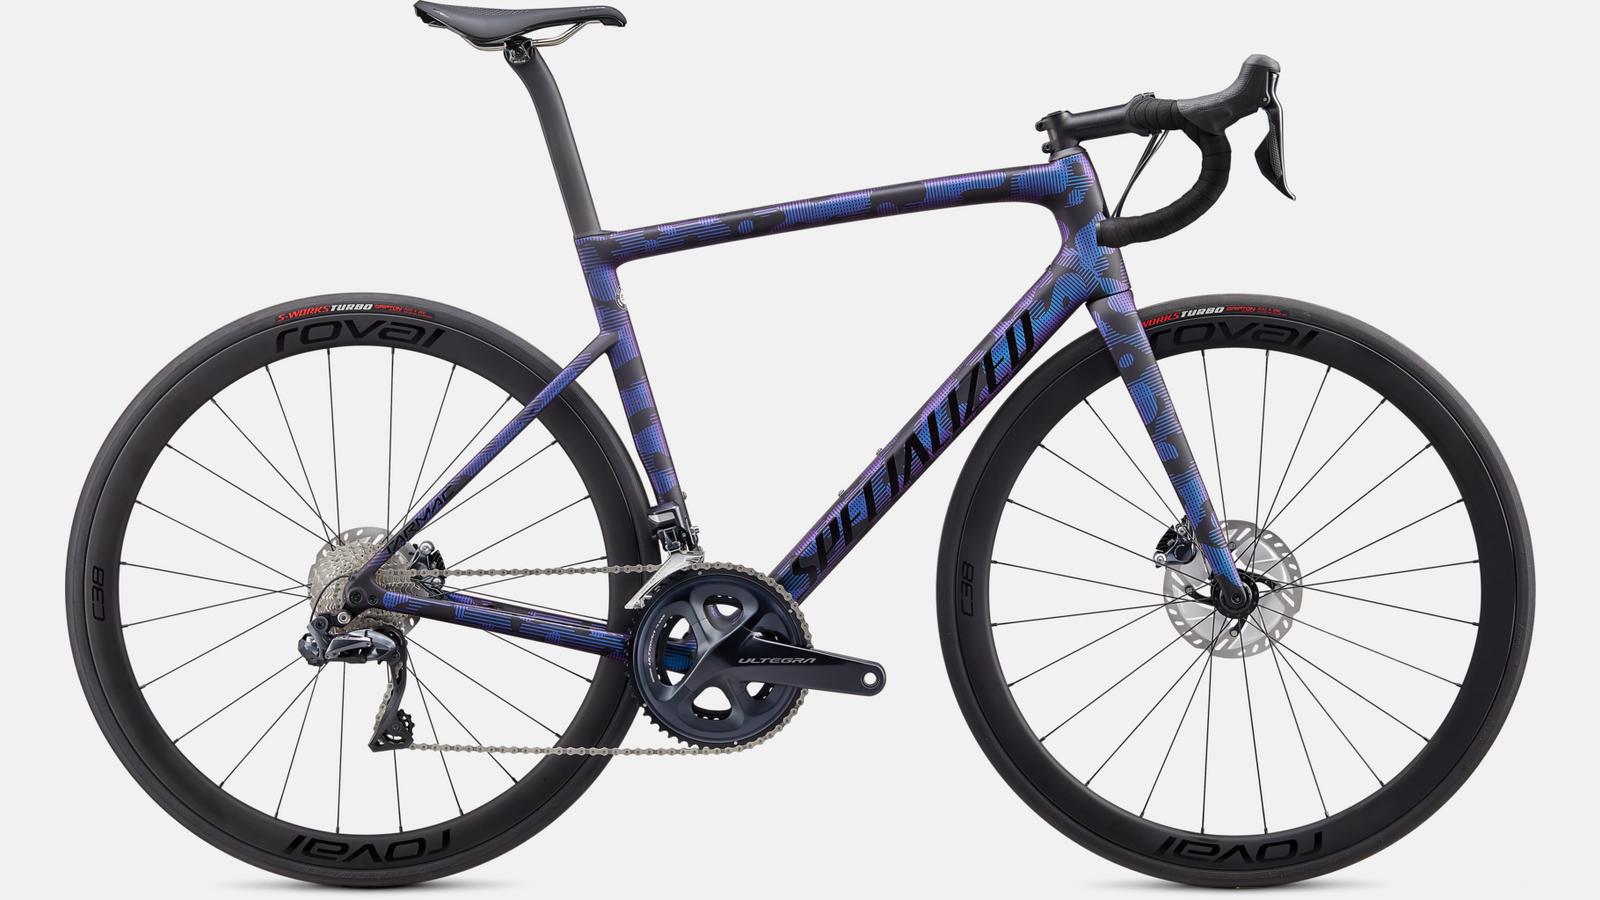 Touch-up paint for 2020 Specialized Tarmac SL6 Disc Expert - Satin Black